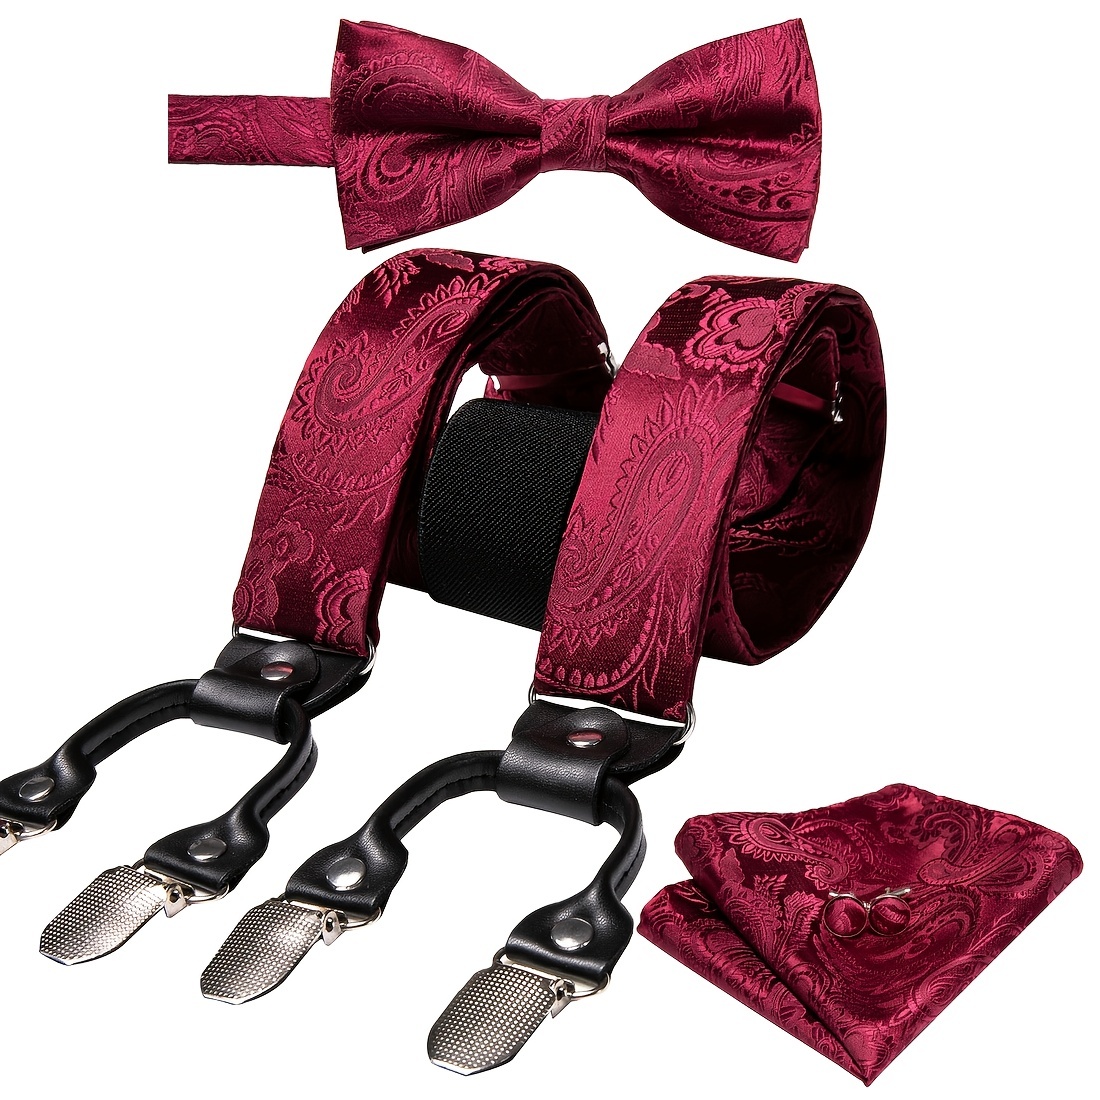 Barry Wang Mens Suspenders Tie Set Adjustable Clips Y Type Suspender And  Necktie Handkerchief Cufflinks Set Formal Casual Gray Green Red Golden, Check Out Today's Deals Now